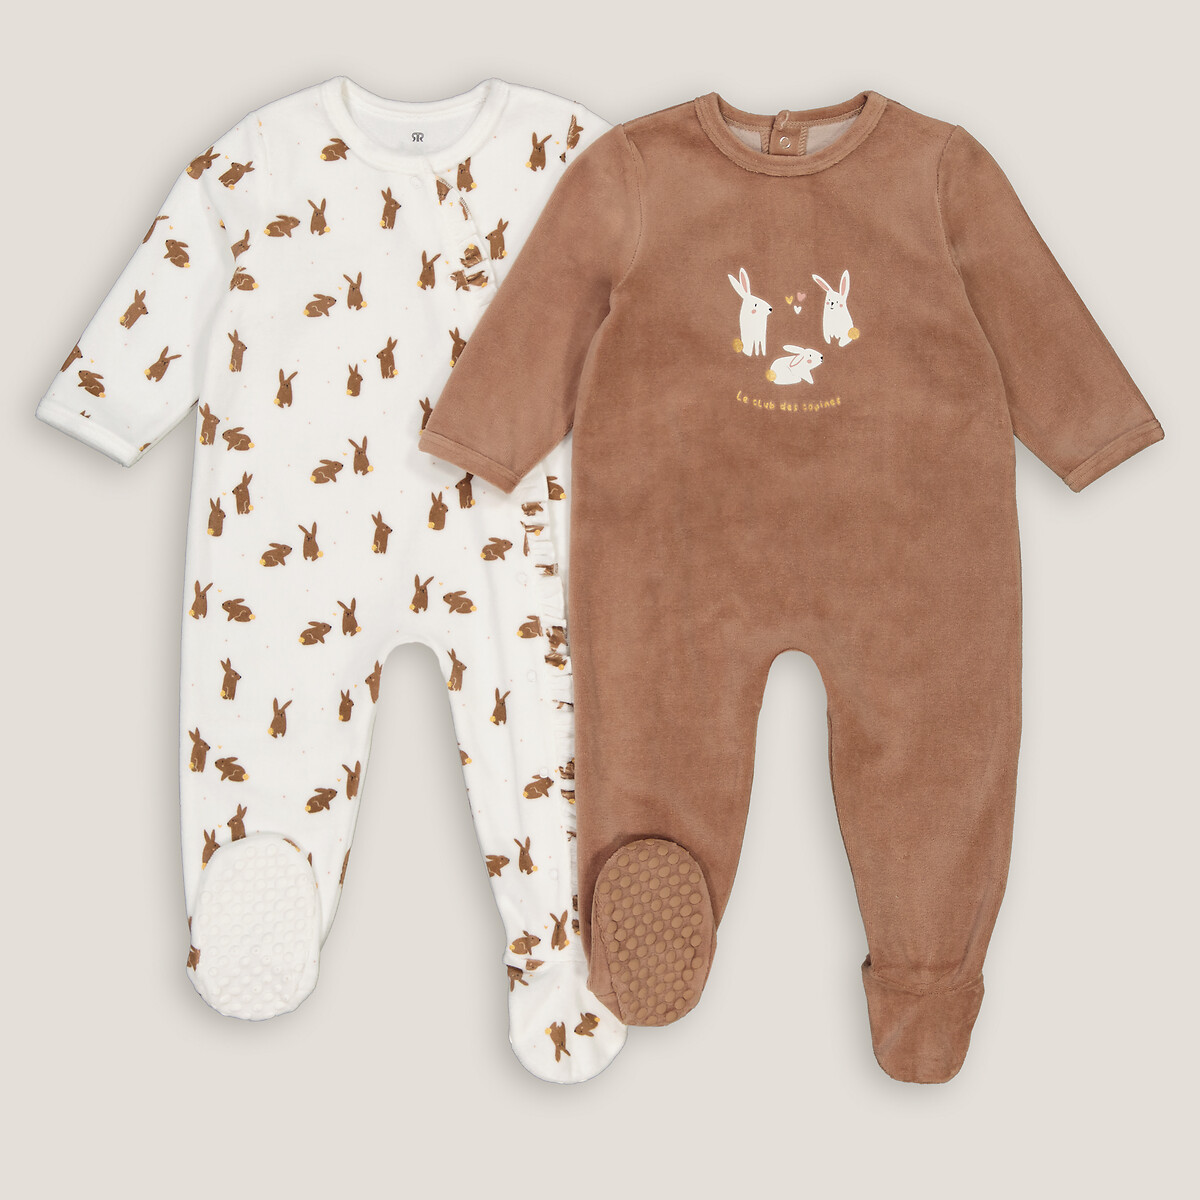 Pack of 2 Velour Sleepsuits with Bunny Rabbit Print